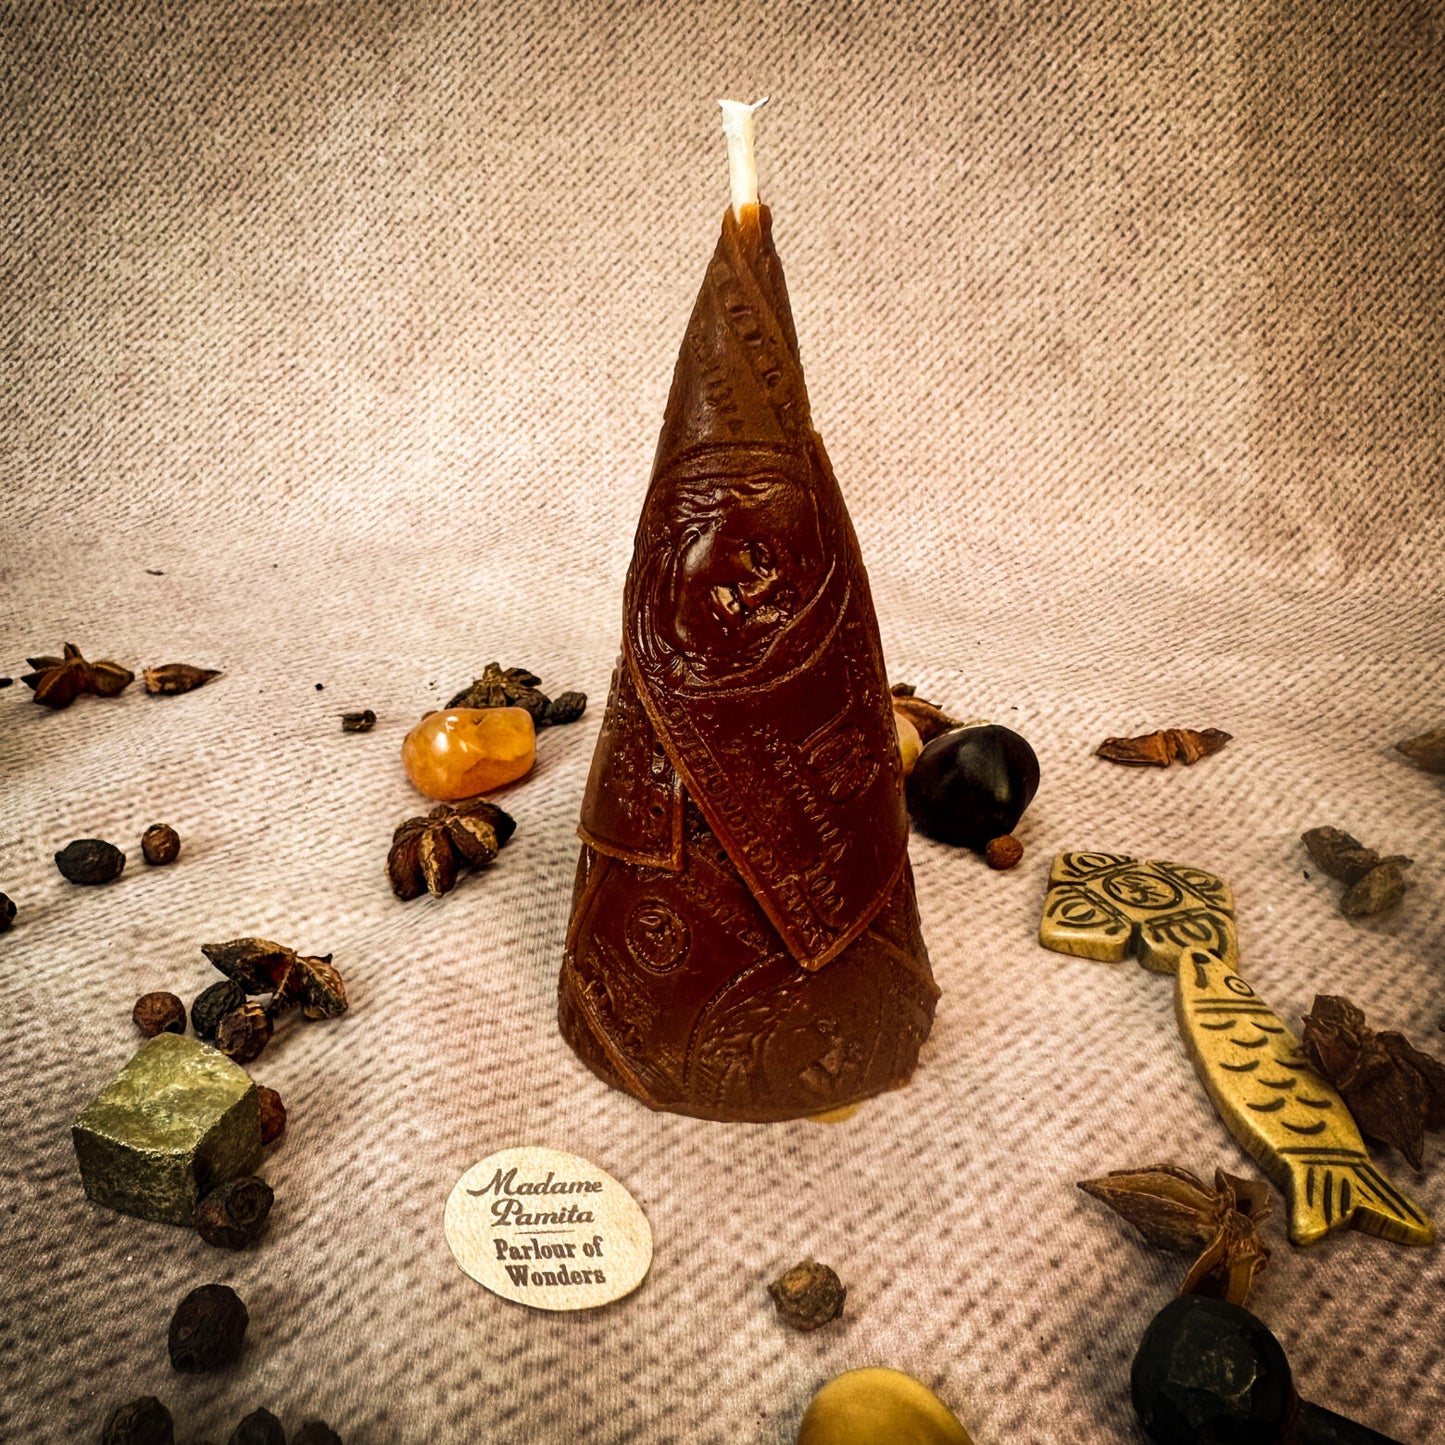 Beeswax Money Maker Spell Candle